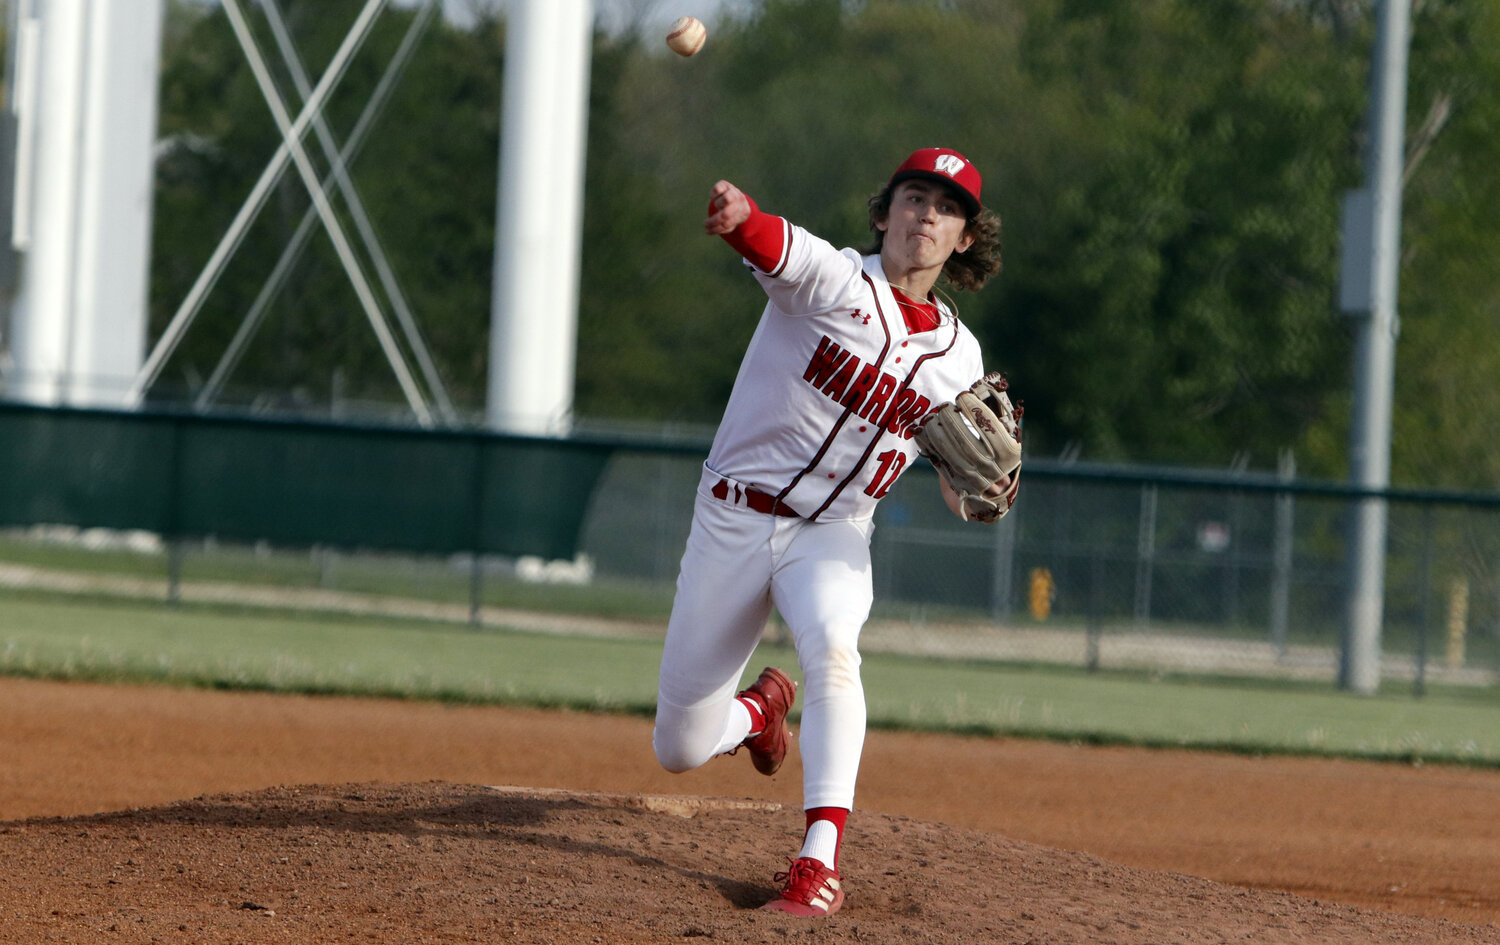 Warrenton senior Kannon Hibbs delivers a pitch to home plate during the fifth inning of last week's game.